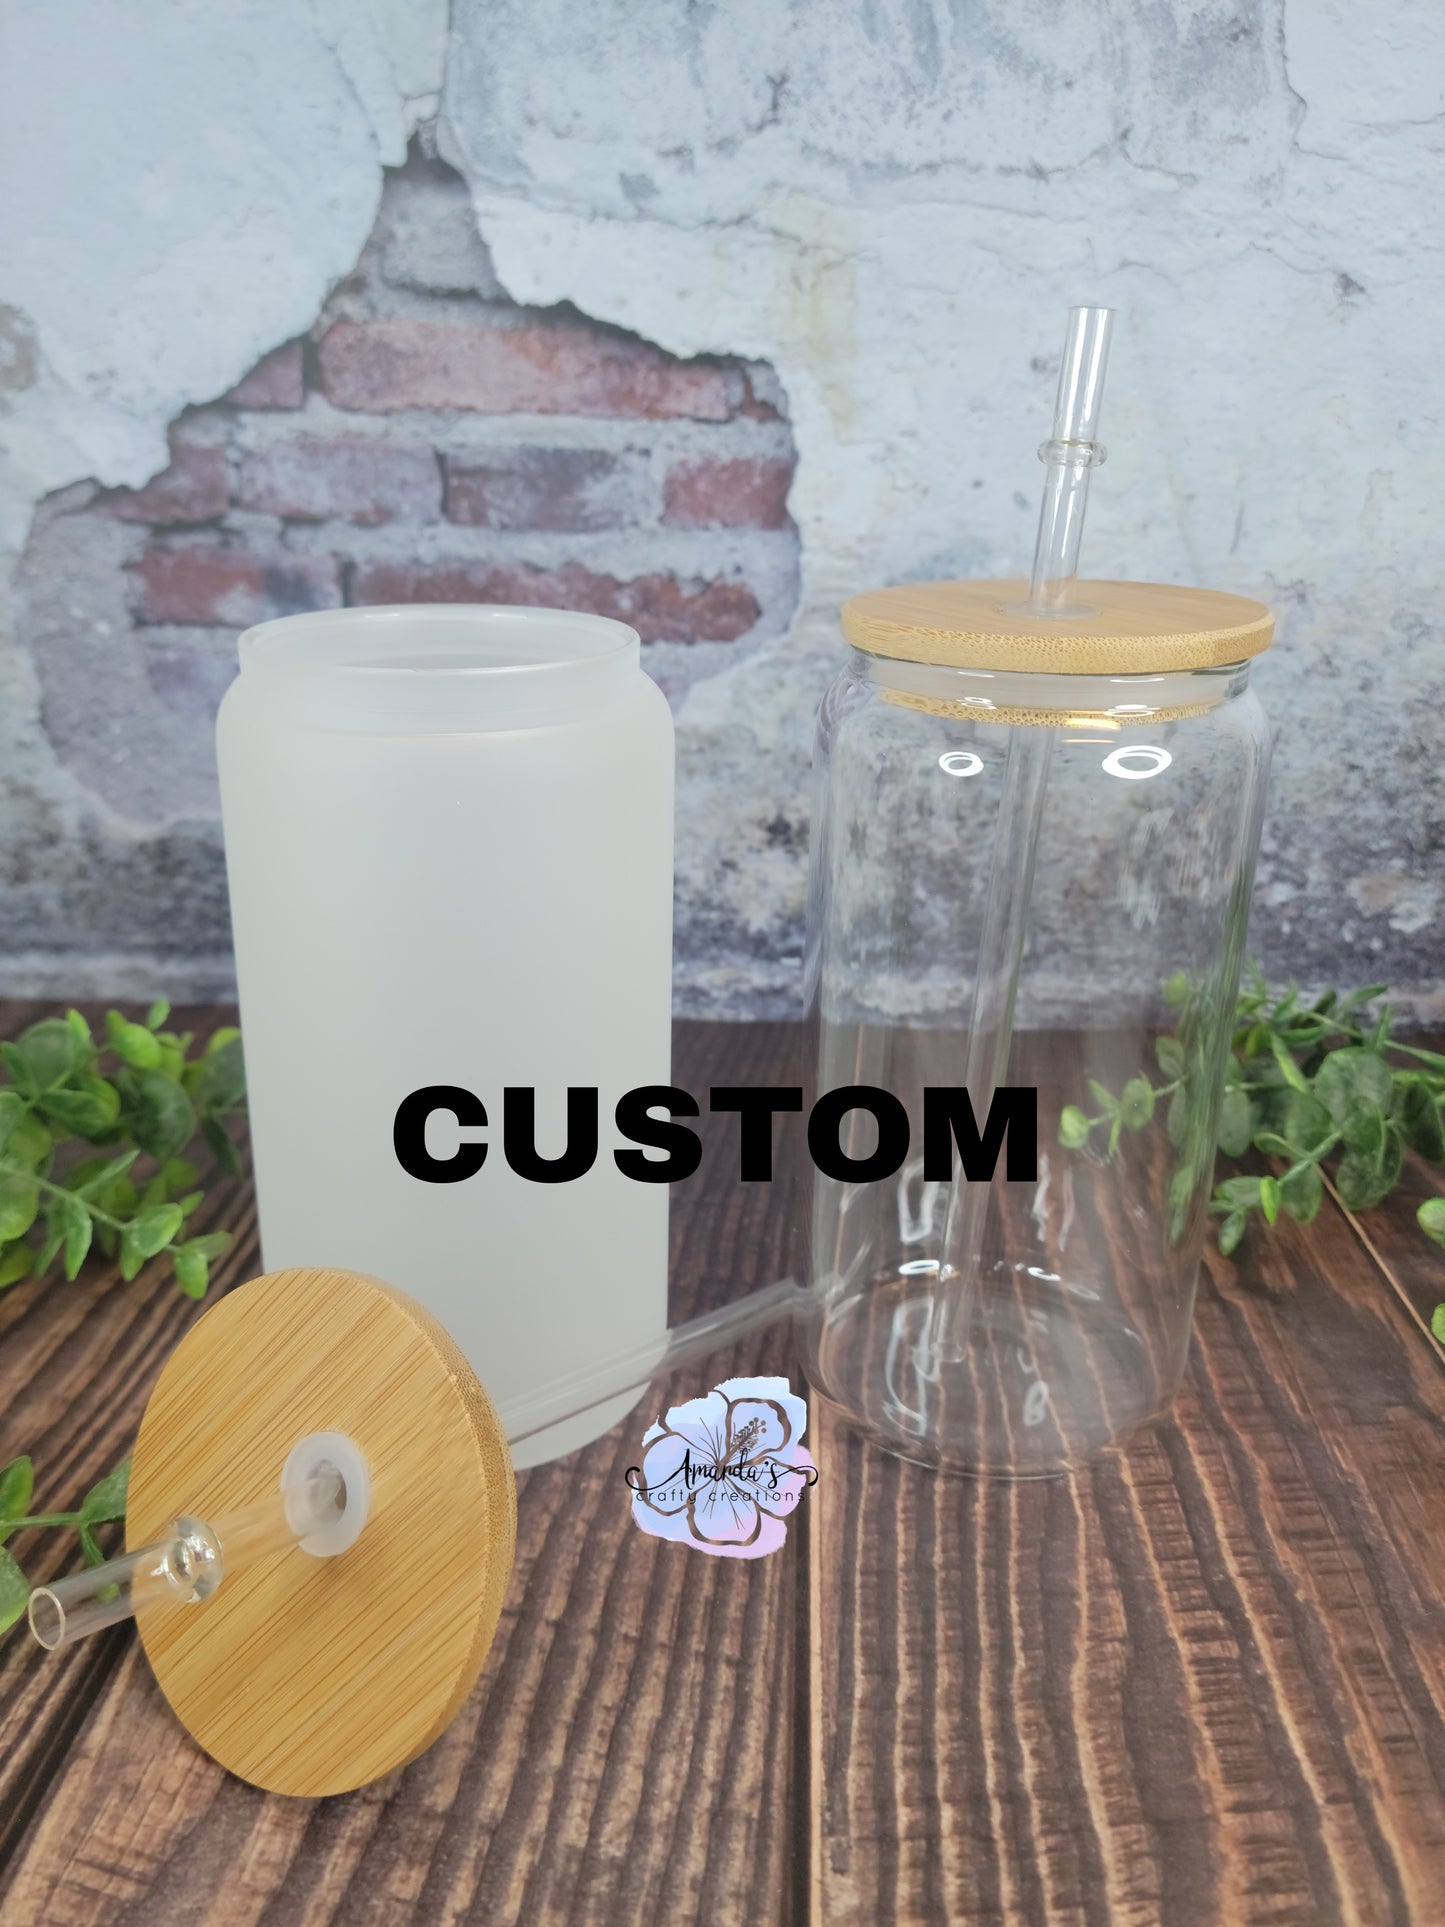 Customizable frosted or clear jar with wooden lid and straw